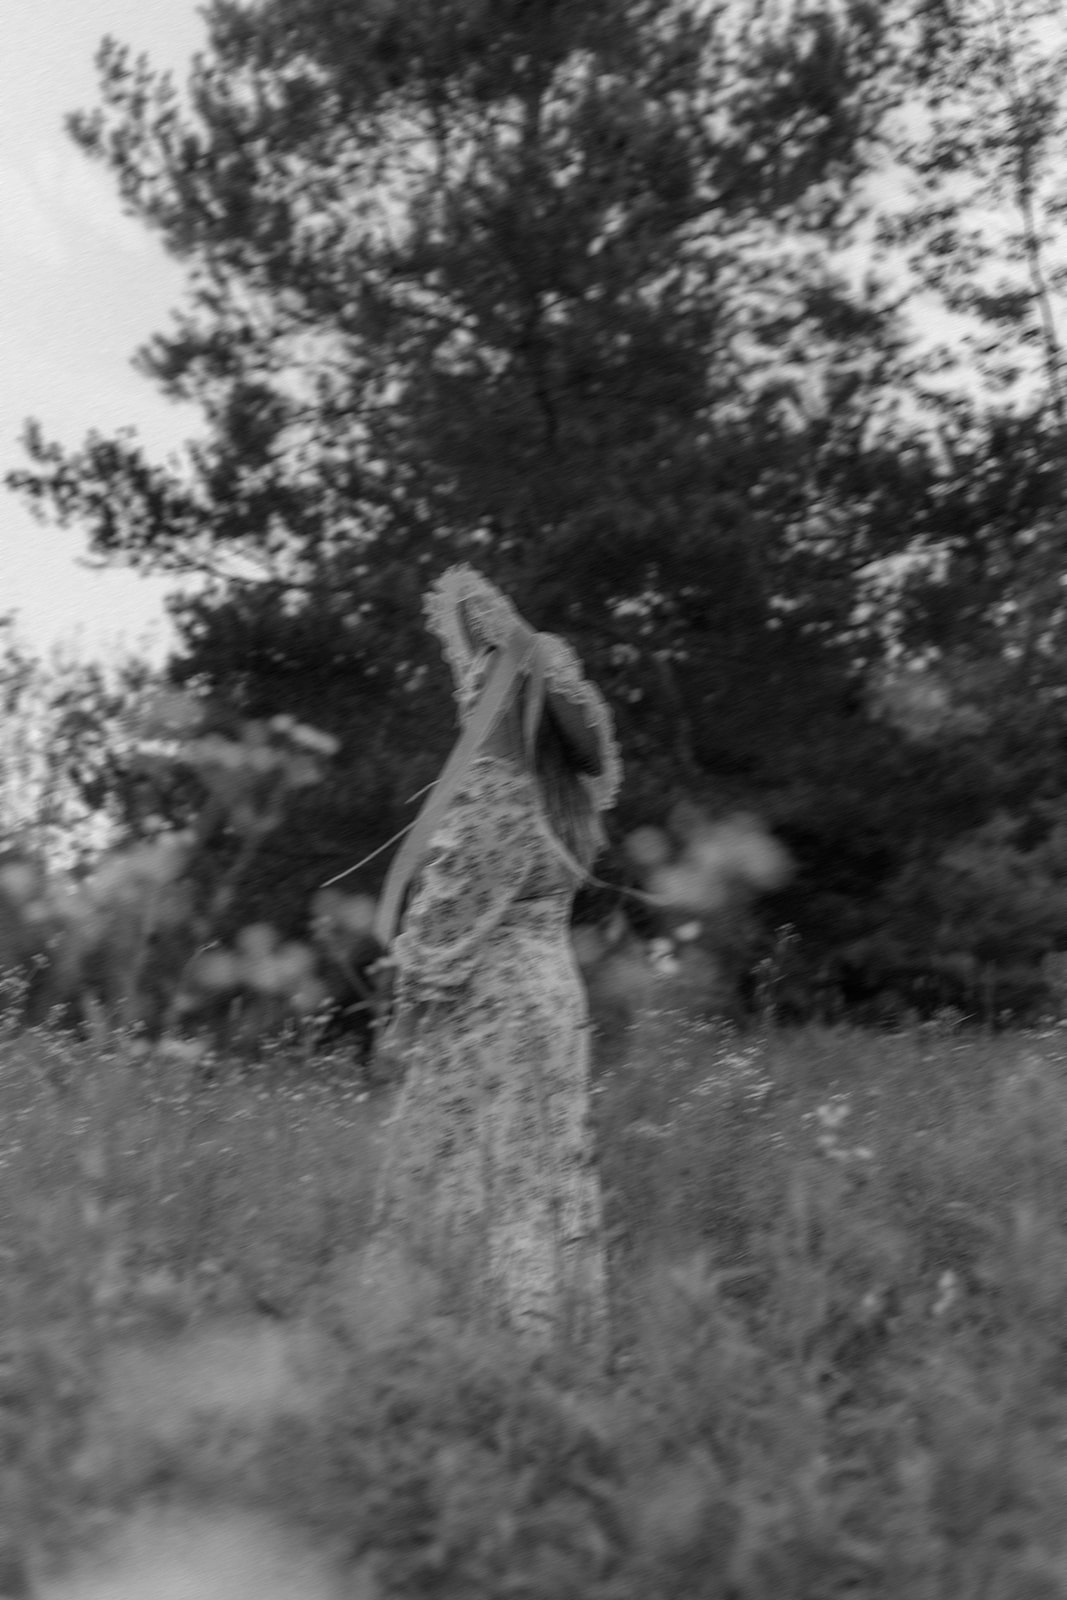 stunning young lady poses in field for her black and white creative self portrait photos